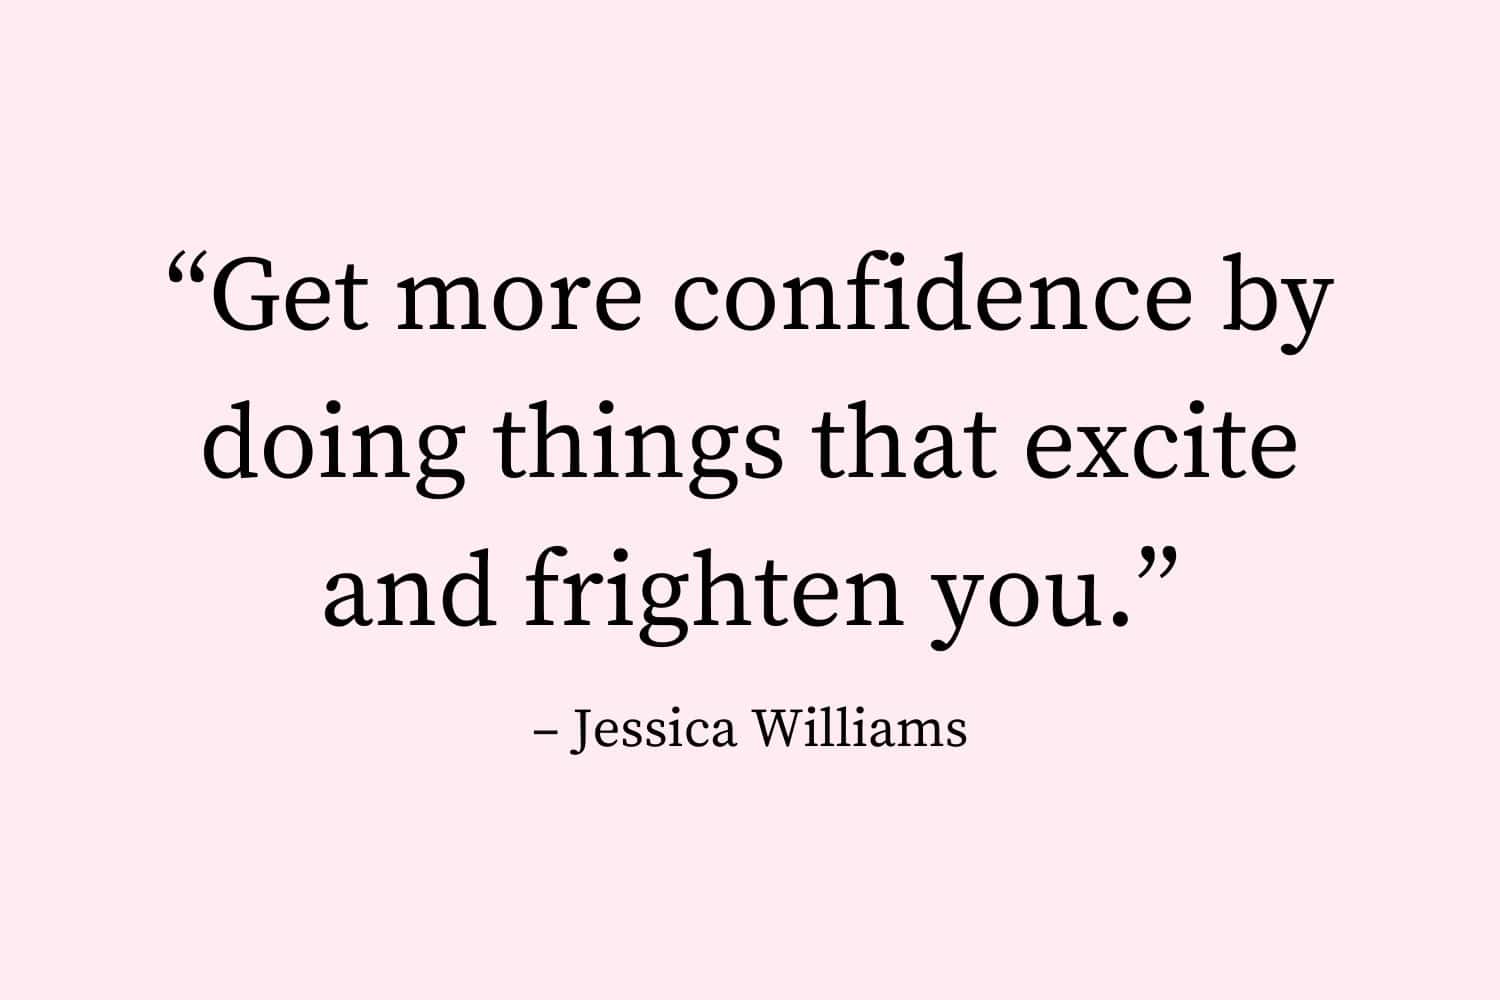 Get more confidence by doing things that excite and frighten you. Jessica Williams